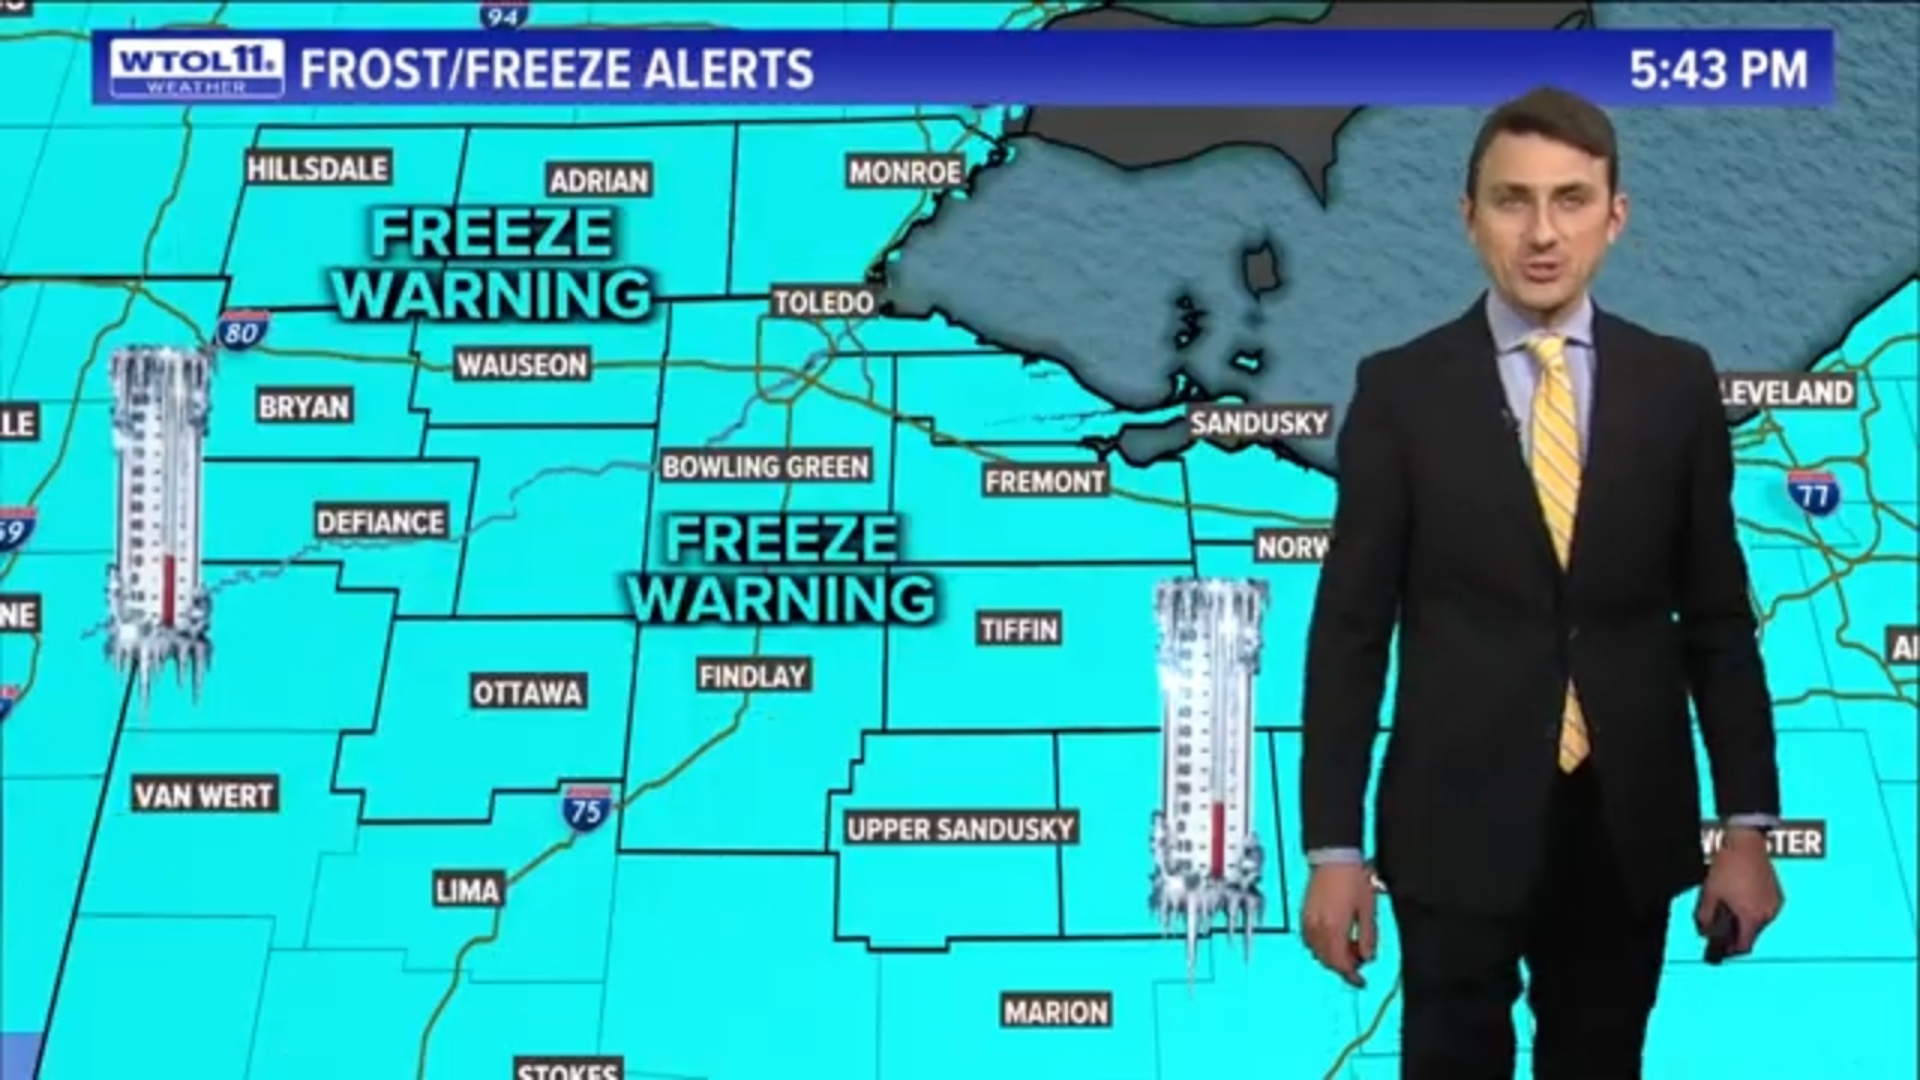 Freeze Warnings are in effect for all of northwest Ohio and southeast Michigan from midnight Wednesday until Thursday at 10 a.m., due to the risk of damaging frost.